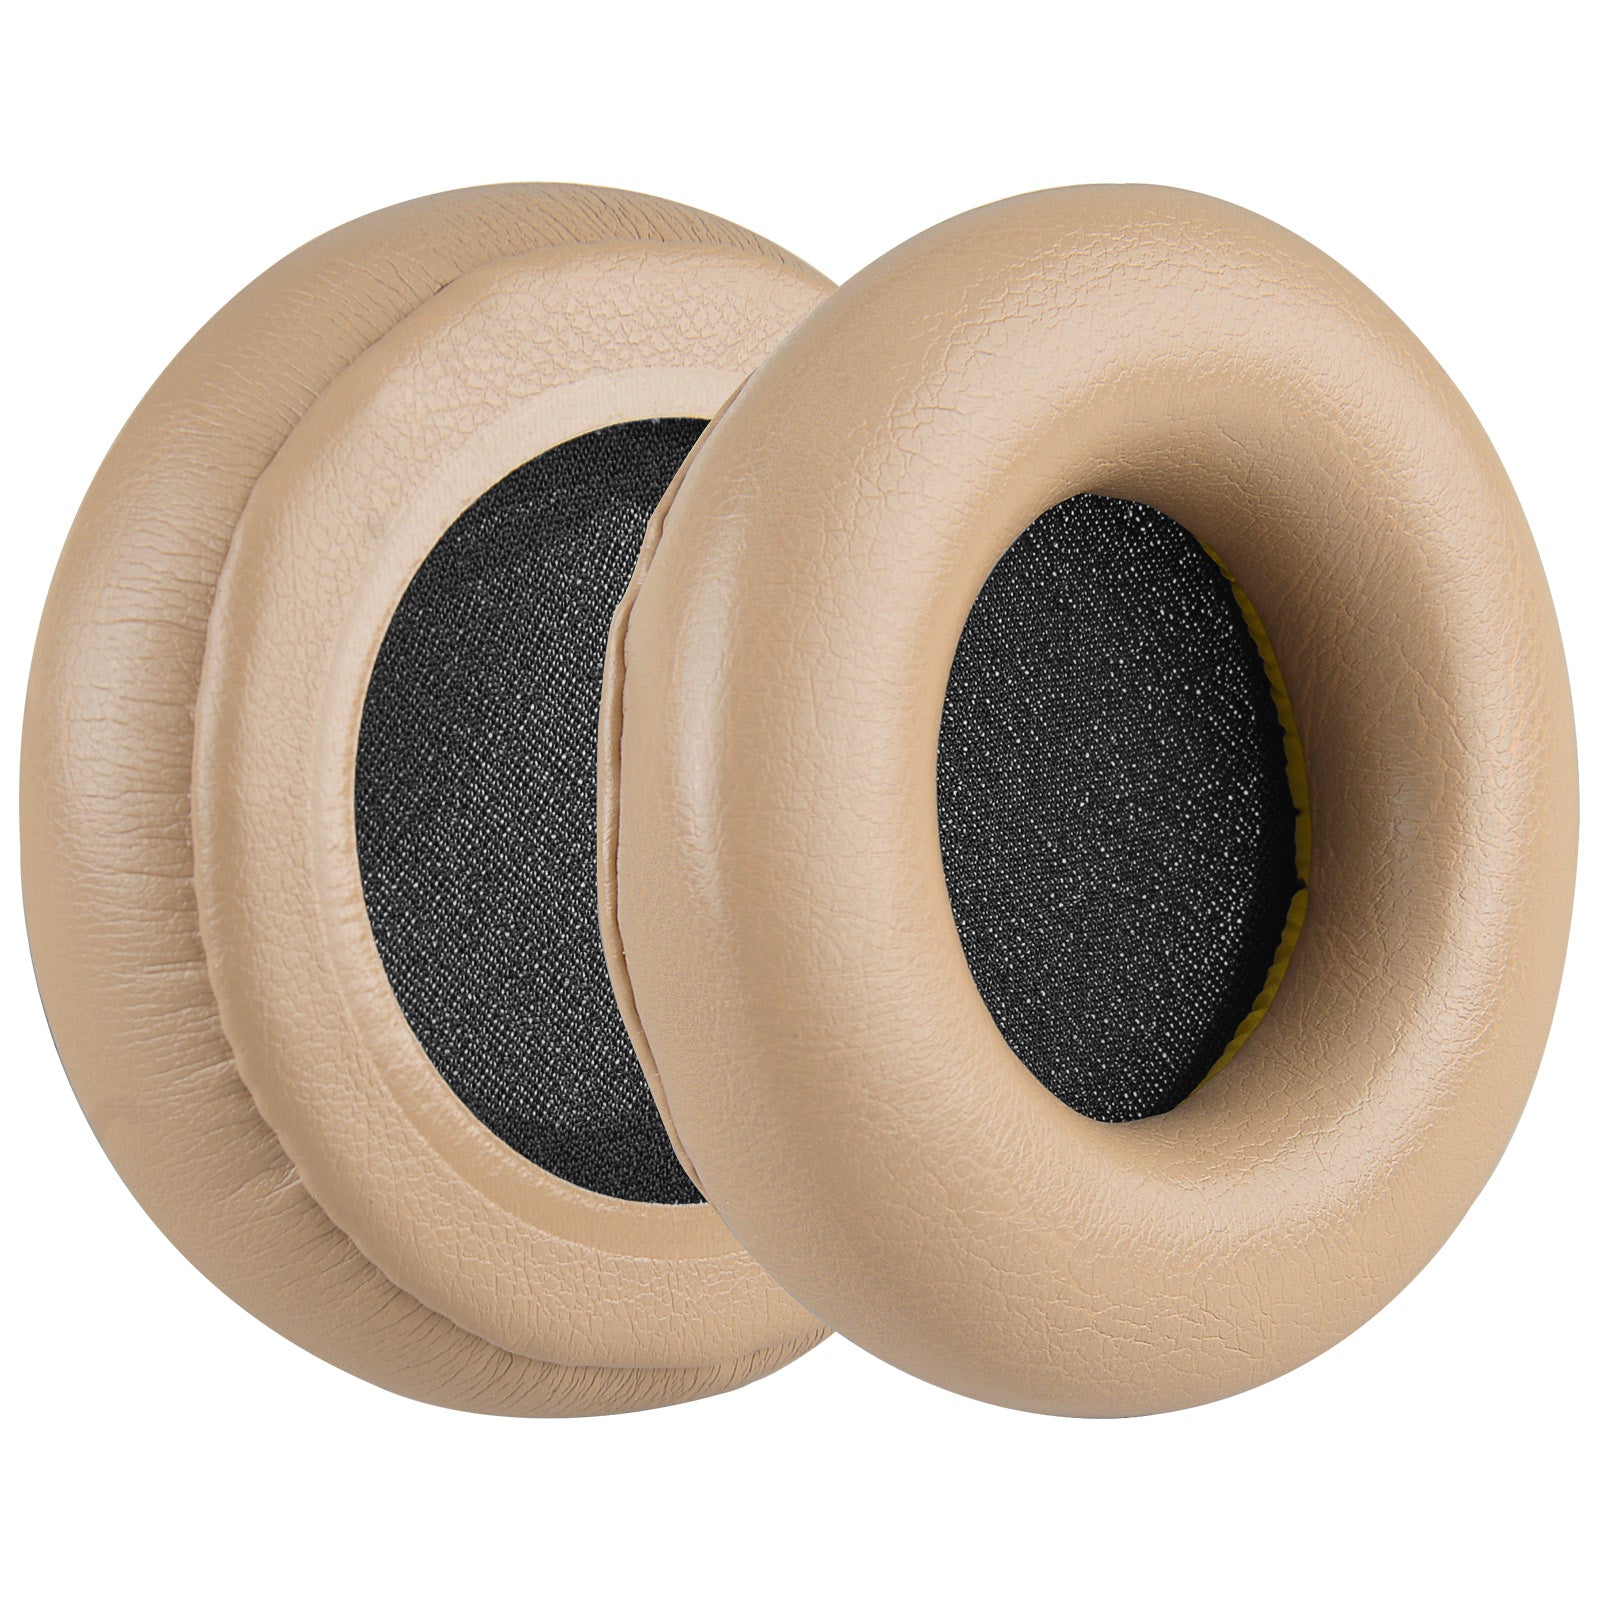 Bang & Olufsen BeoPlay H5 Silicone Earfins Ear Pads B&O Beo